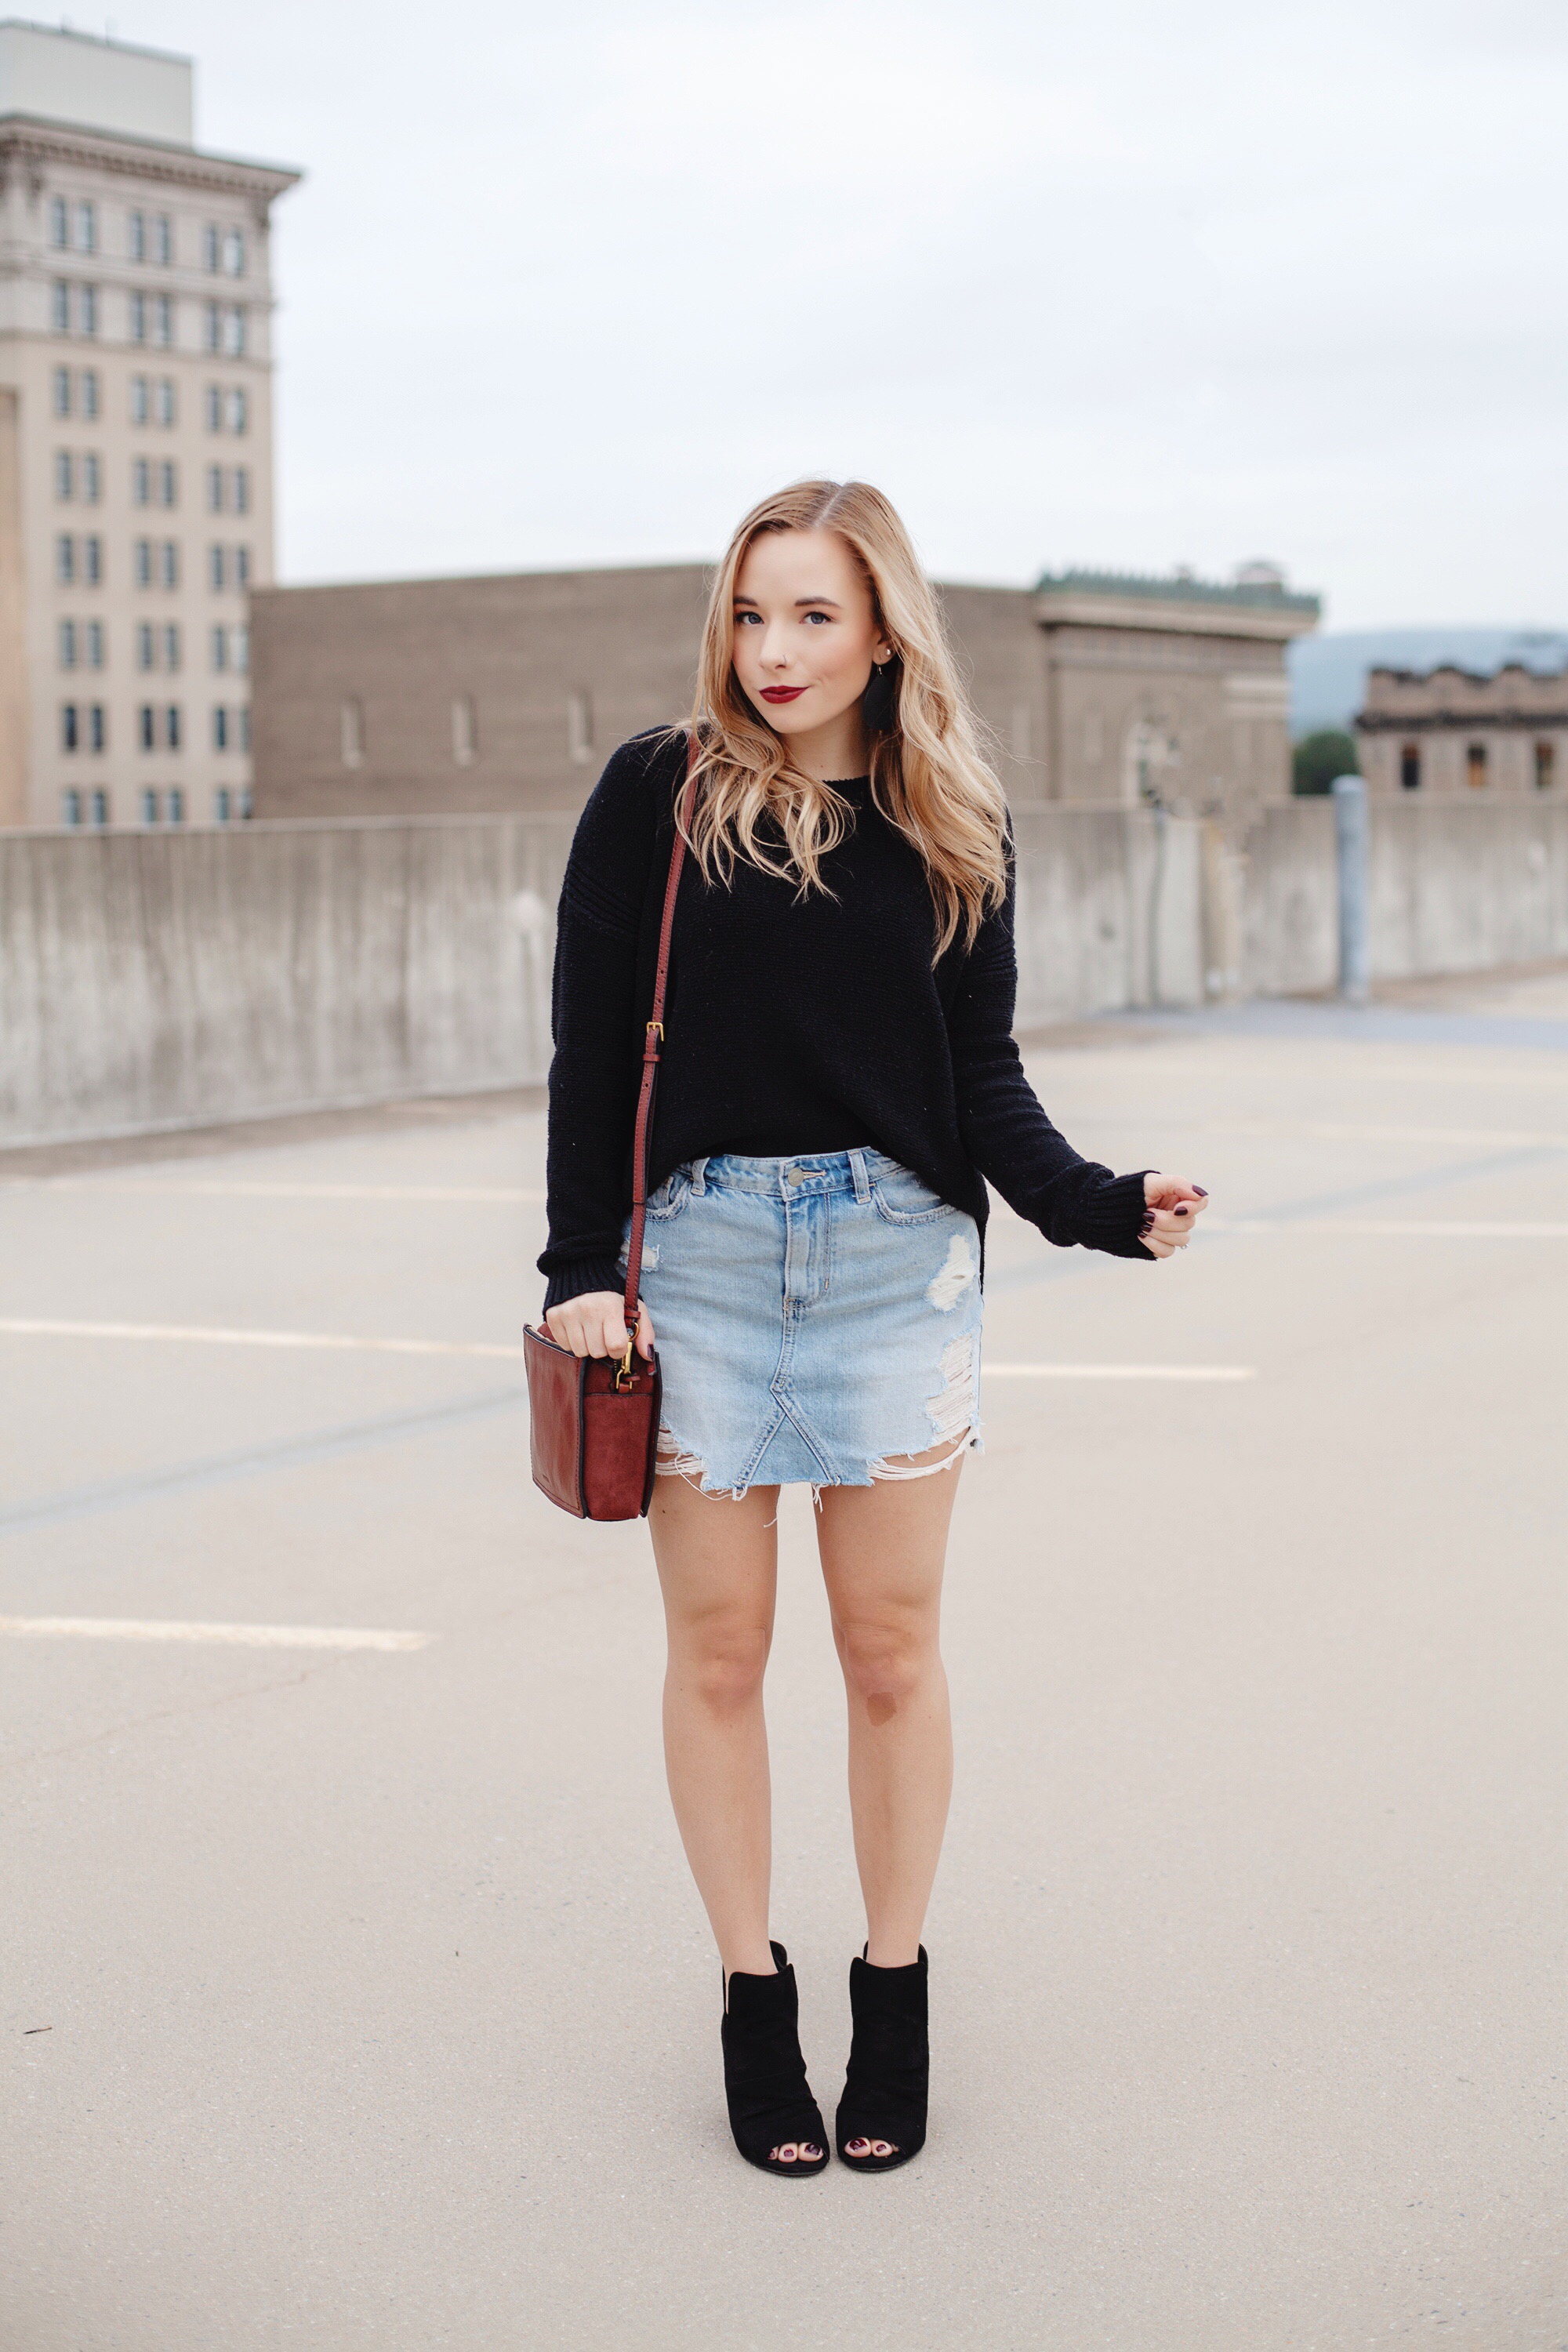 How To Style Your Mini Jeans Skirts And Look Fabulous. (Photos)